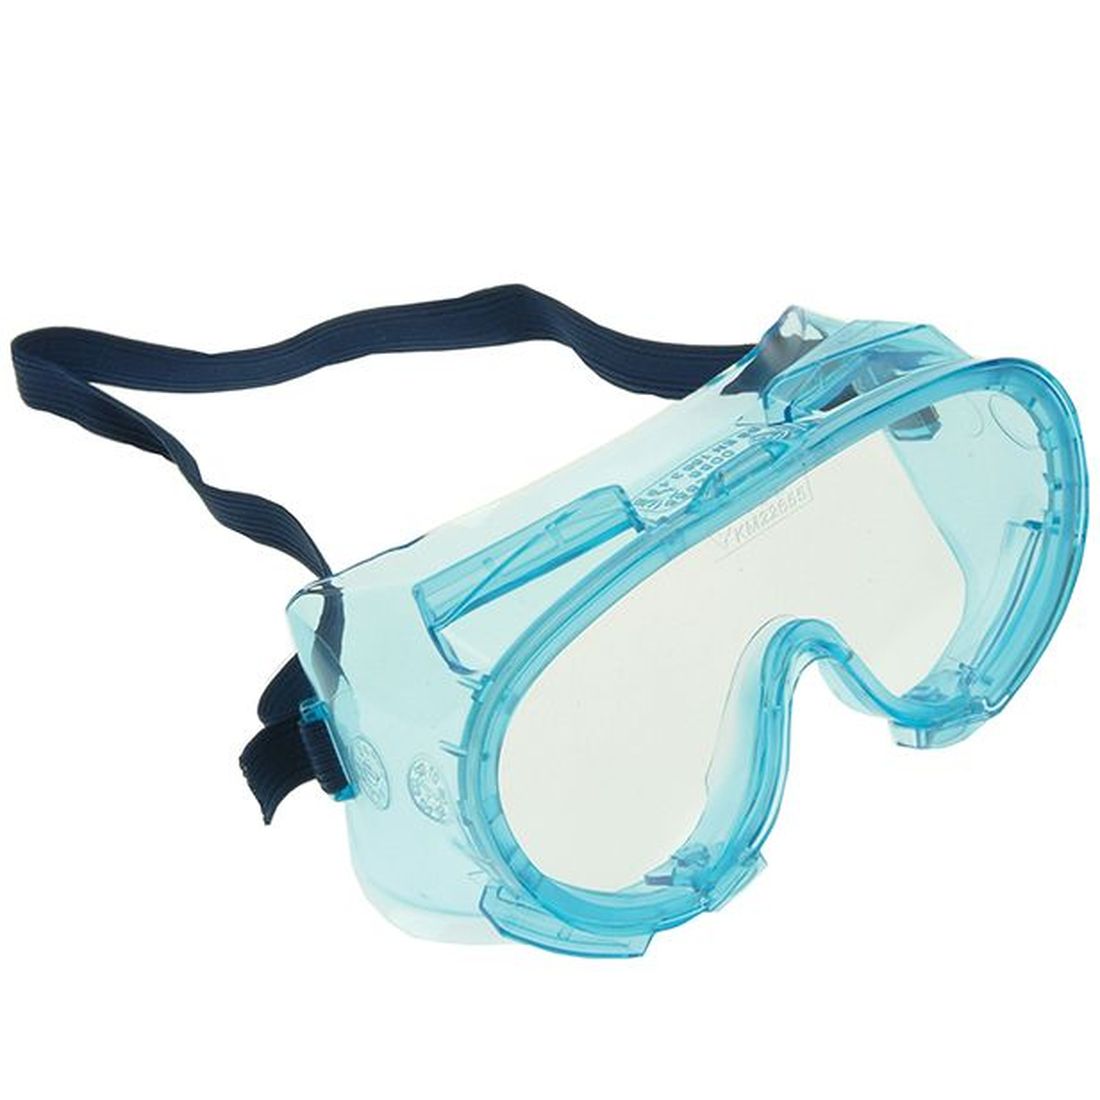 Vitrex Safety Goggles - Clear            